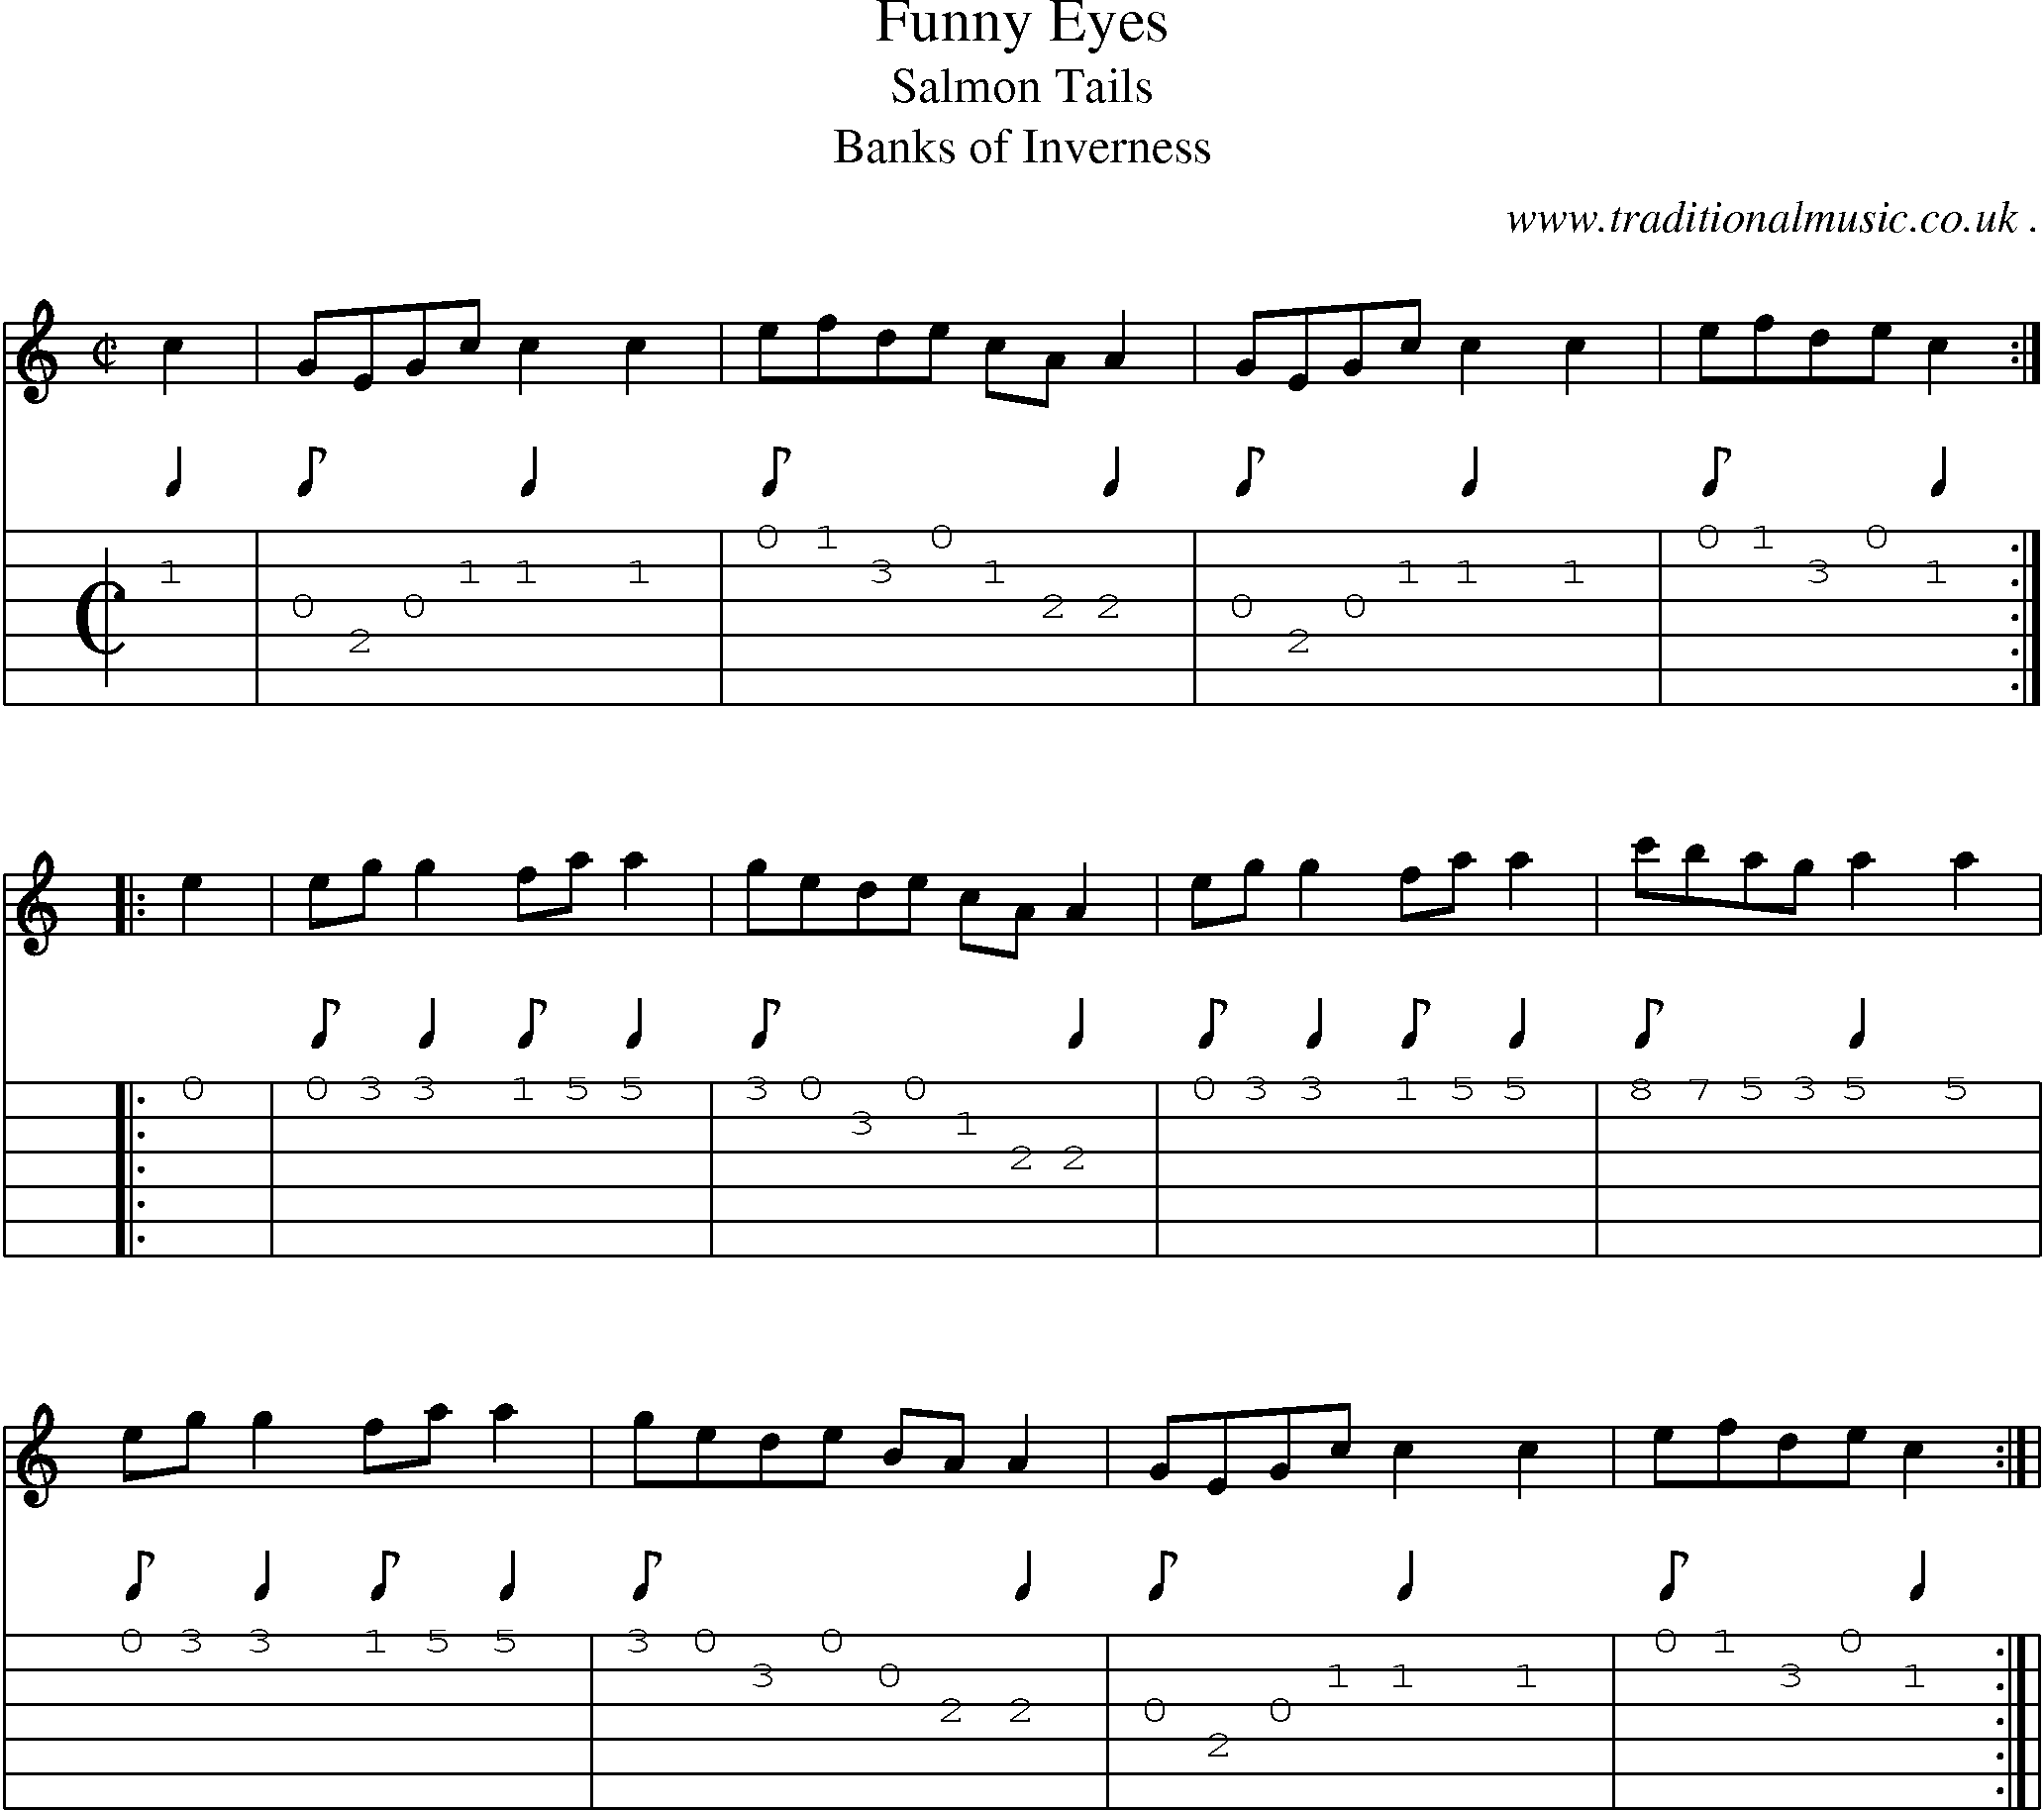 Sheet-Music and Guitar Tabs for Funny Eyes